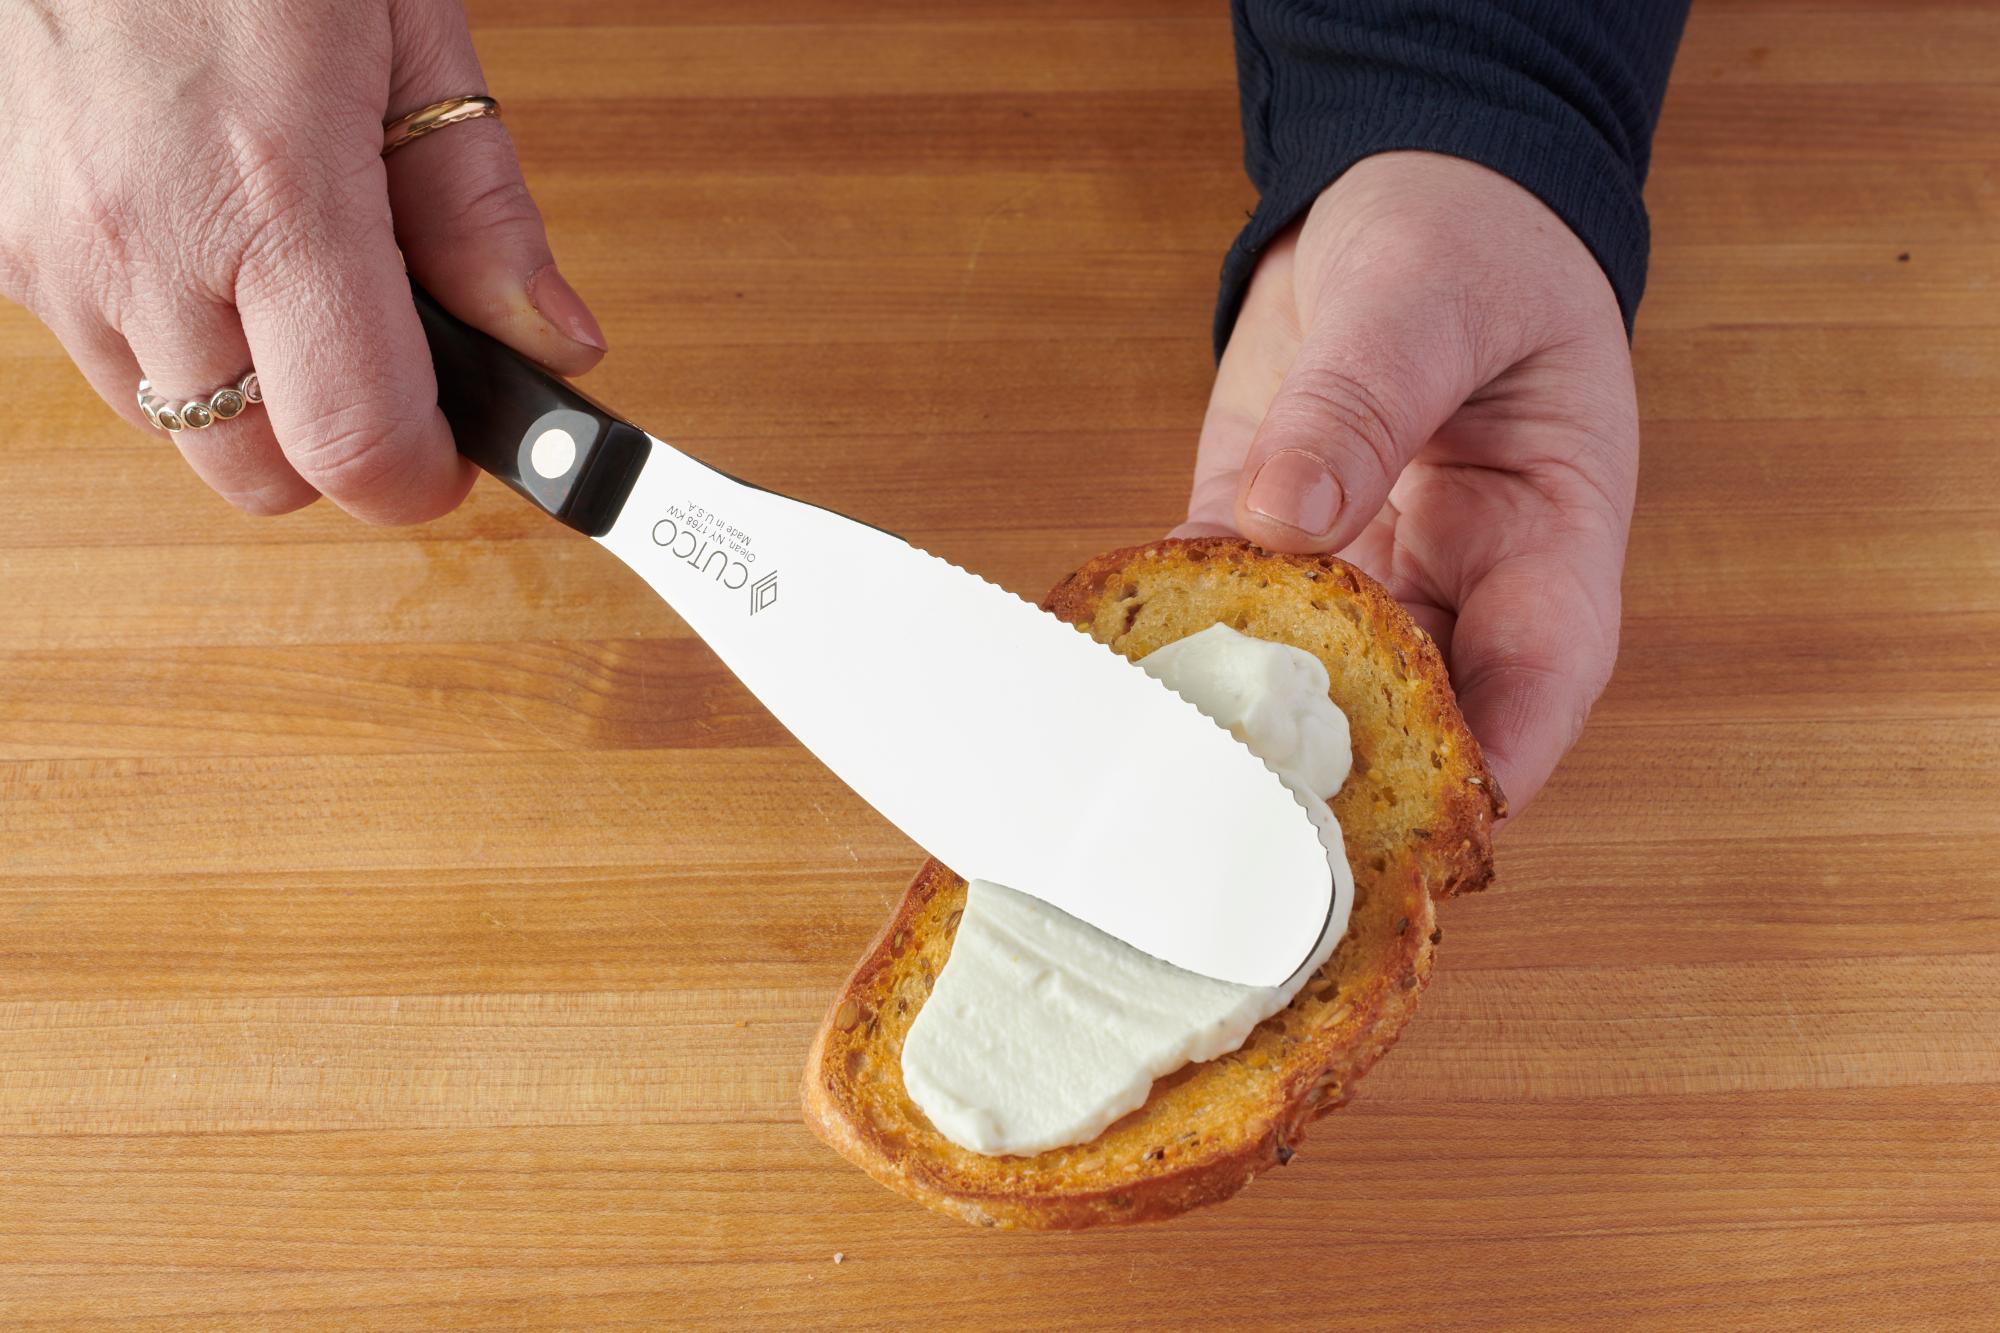 Spreading the ricotta mixture on toast with the Spatula Spreader.